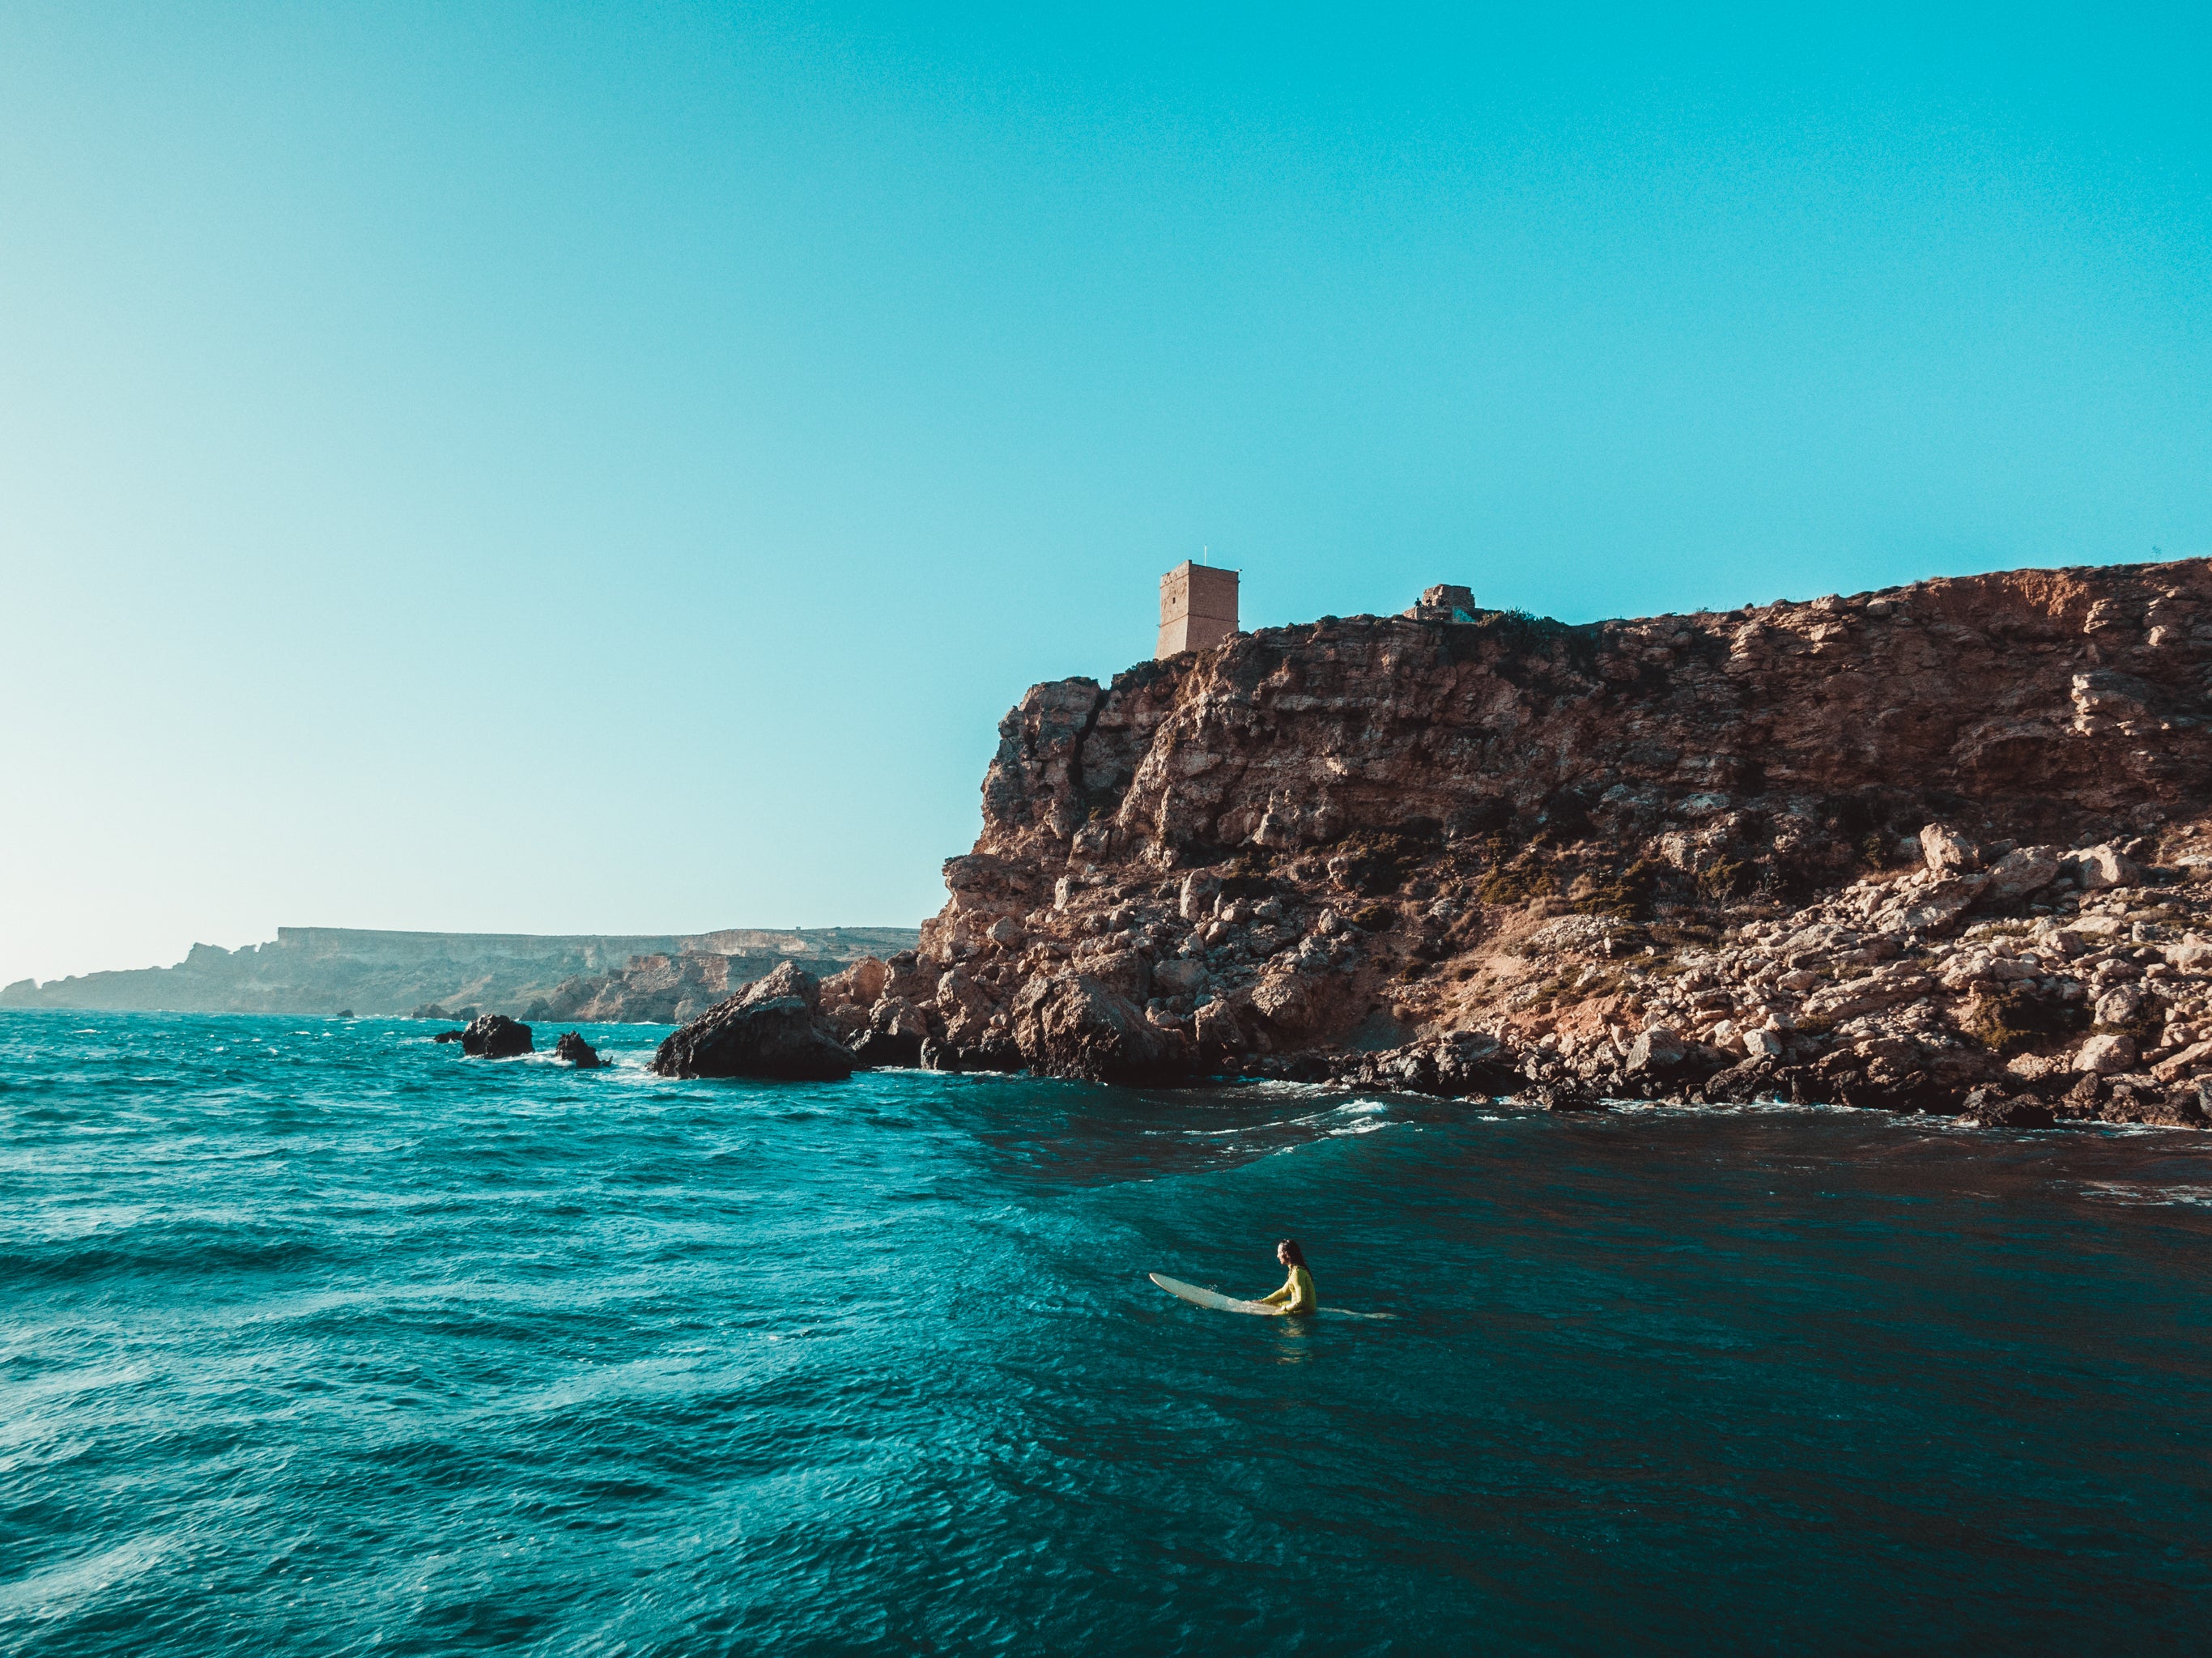 Whether you’re looking for adventure or relaxation, Malta has it all